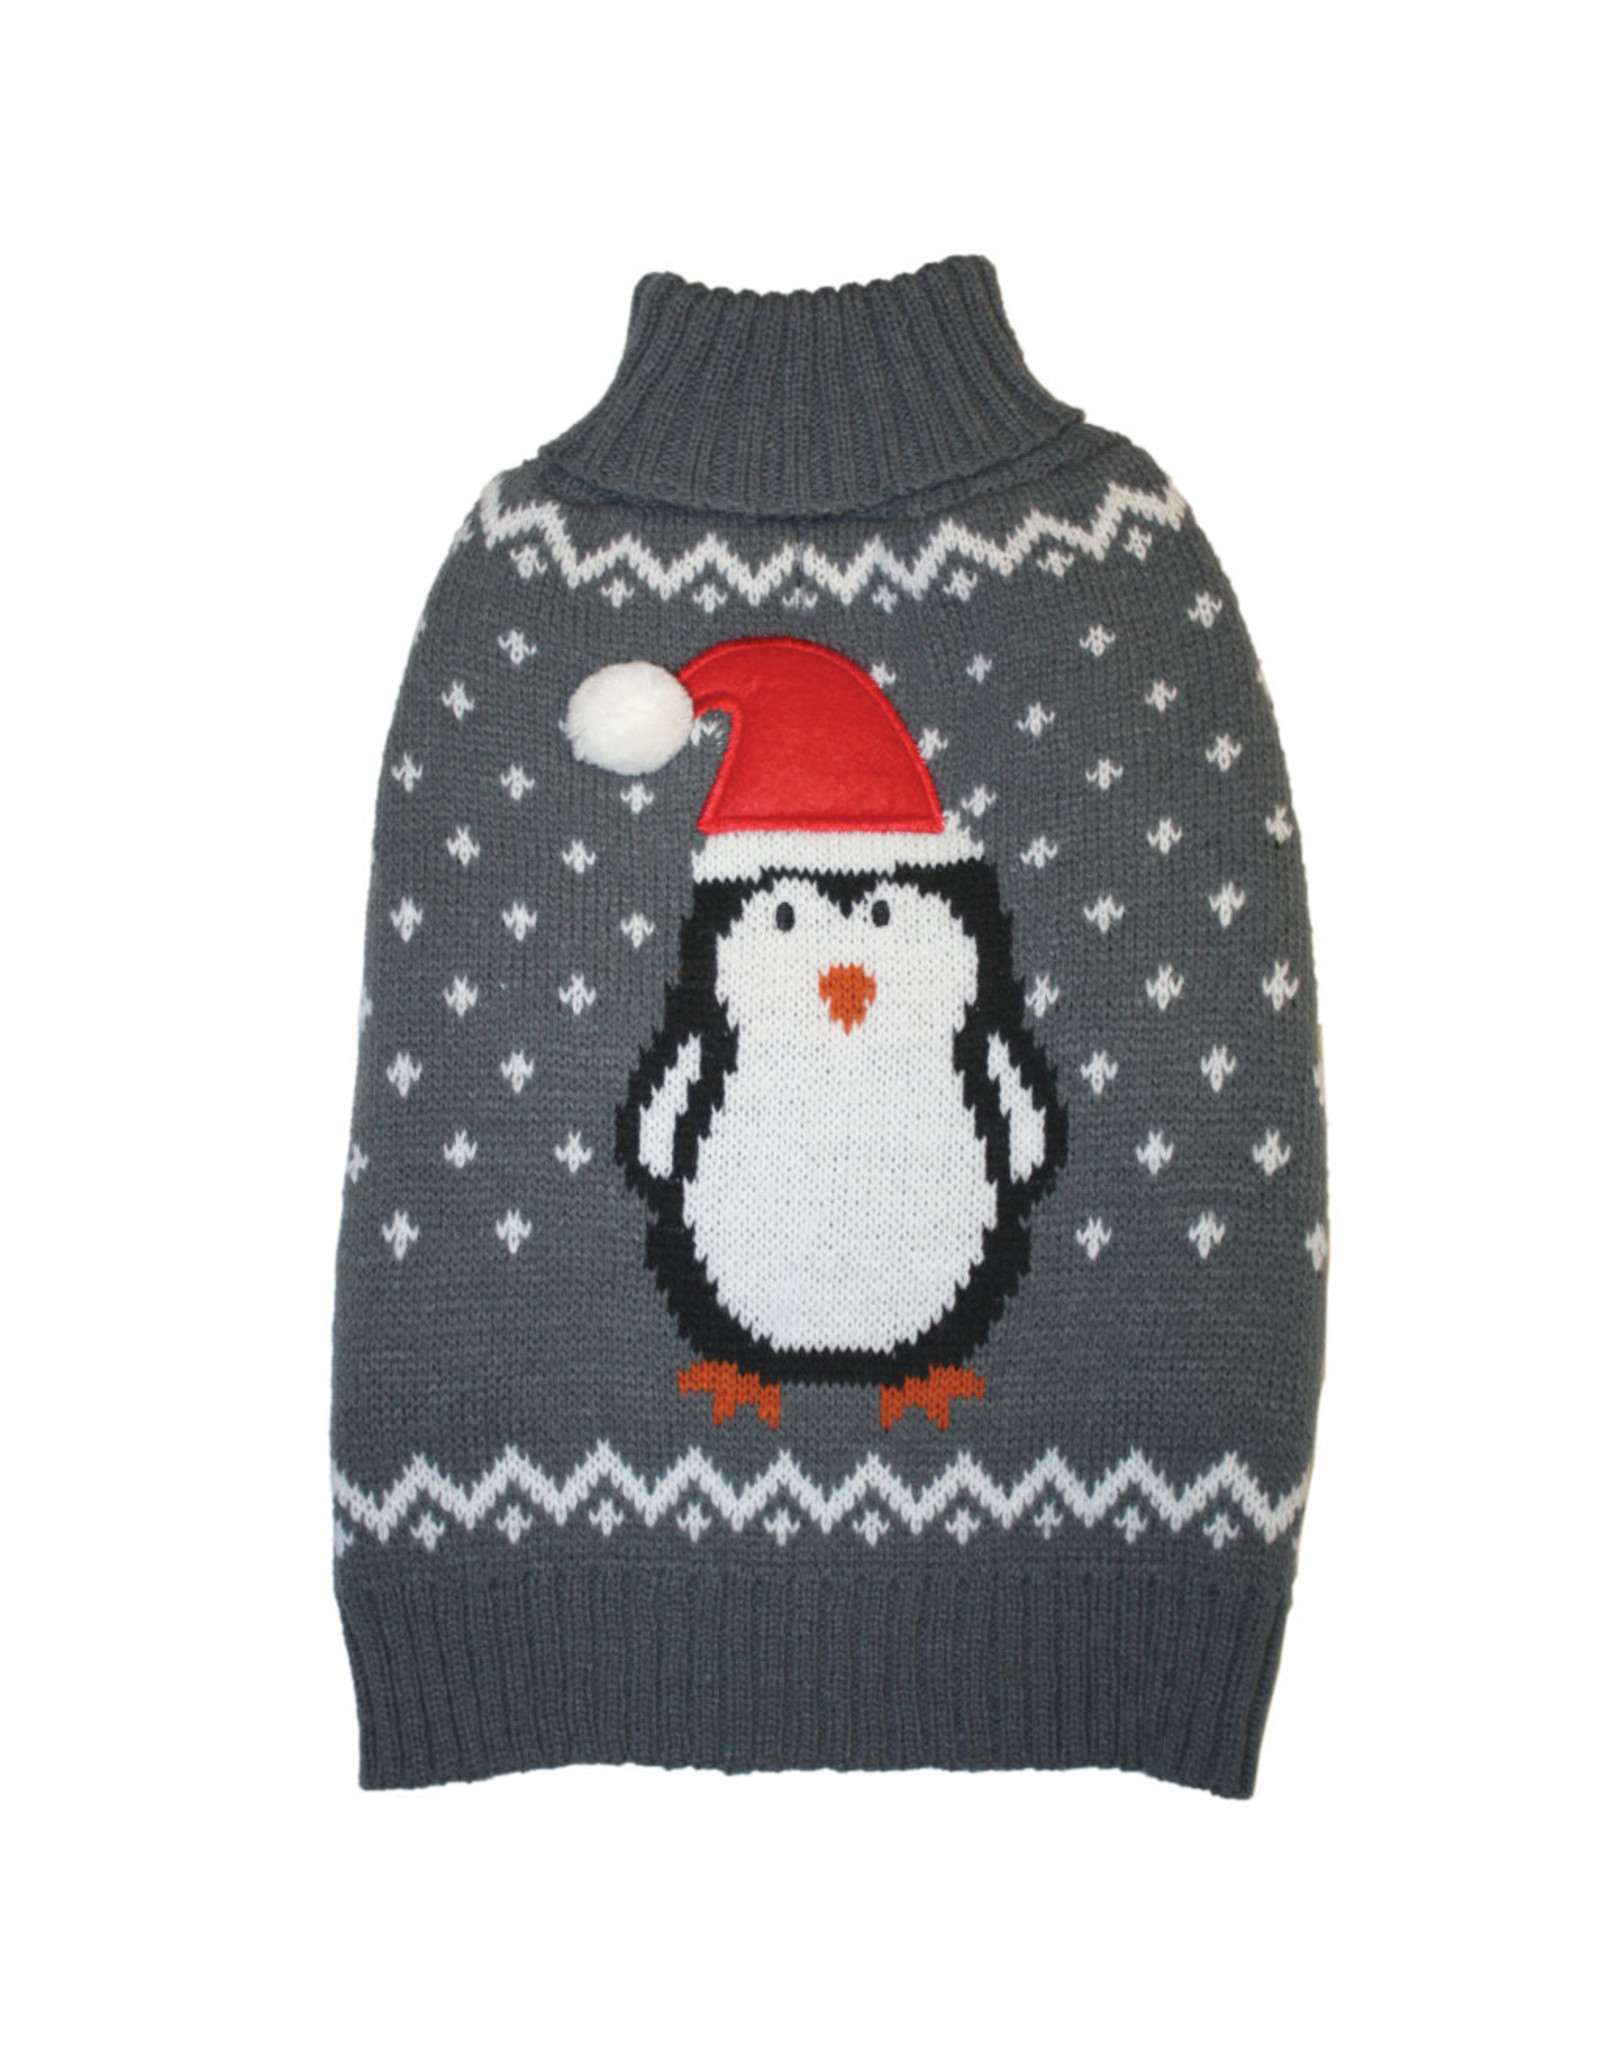 Spot - Ethical Pet Products Penguin Sweater Gray